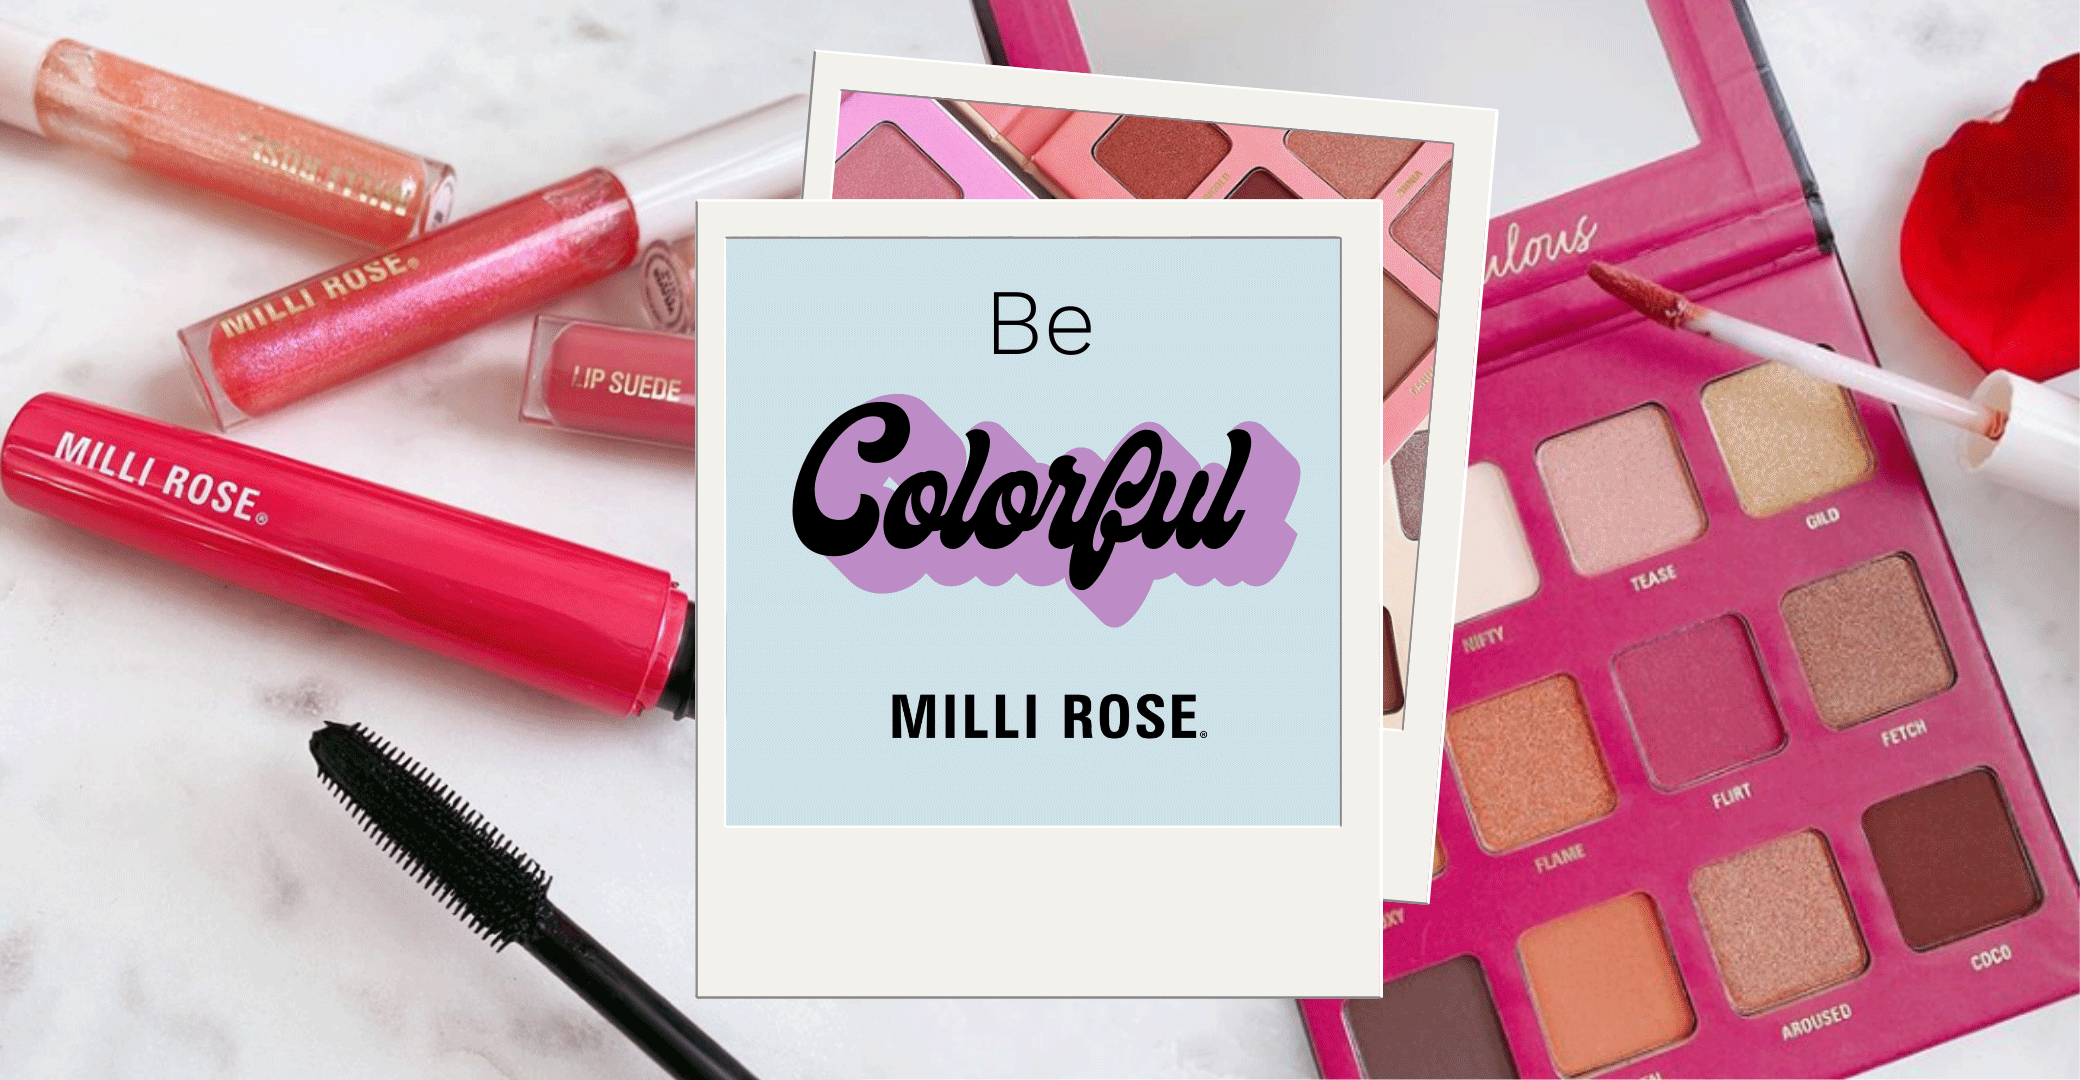 Why I’m Obsessed with the MILLI ROSE Product Line